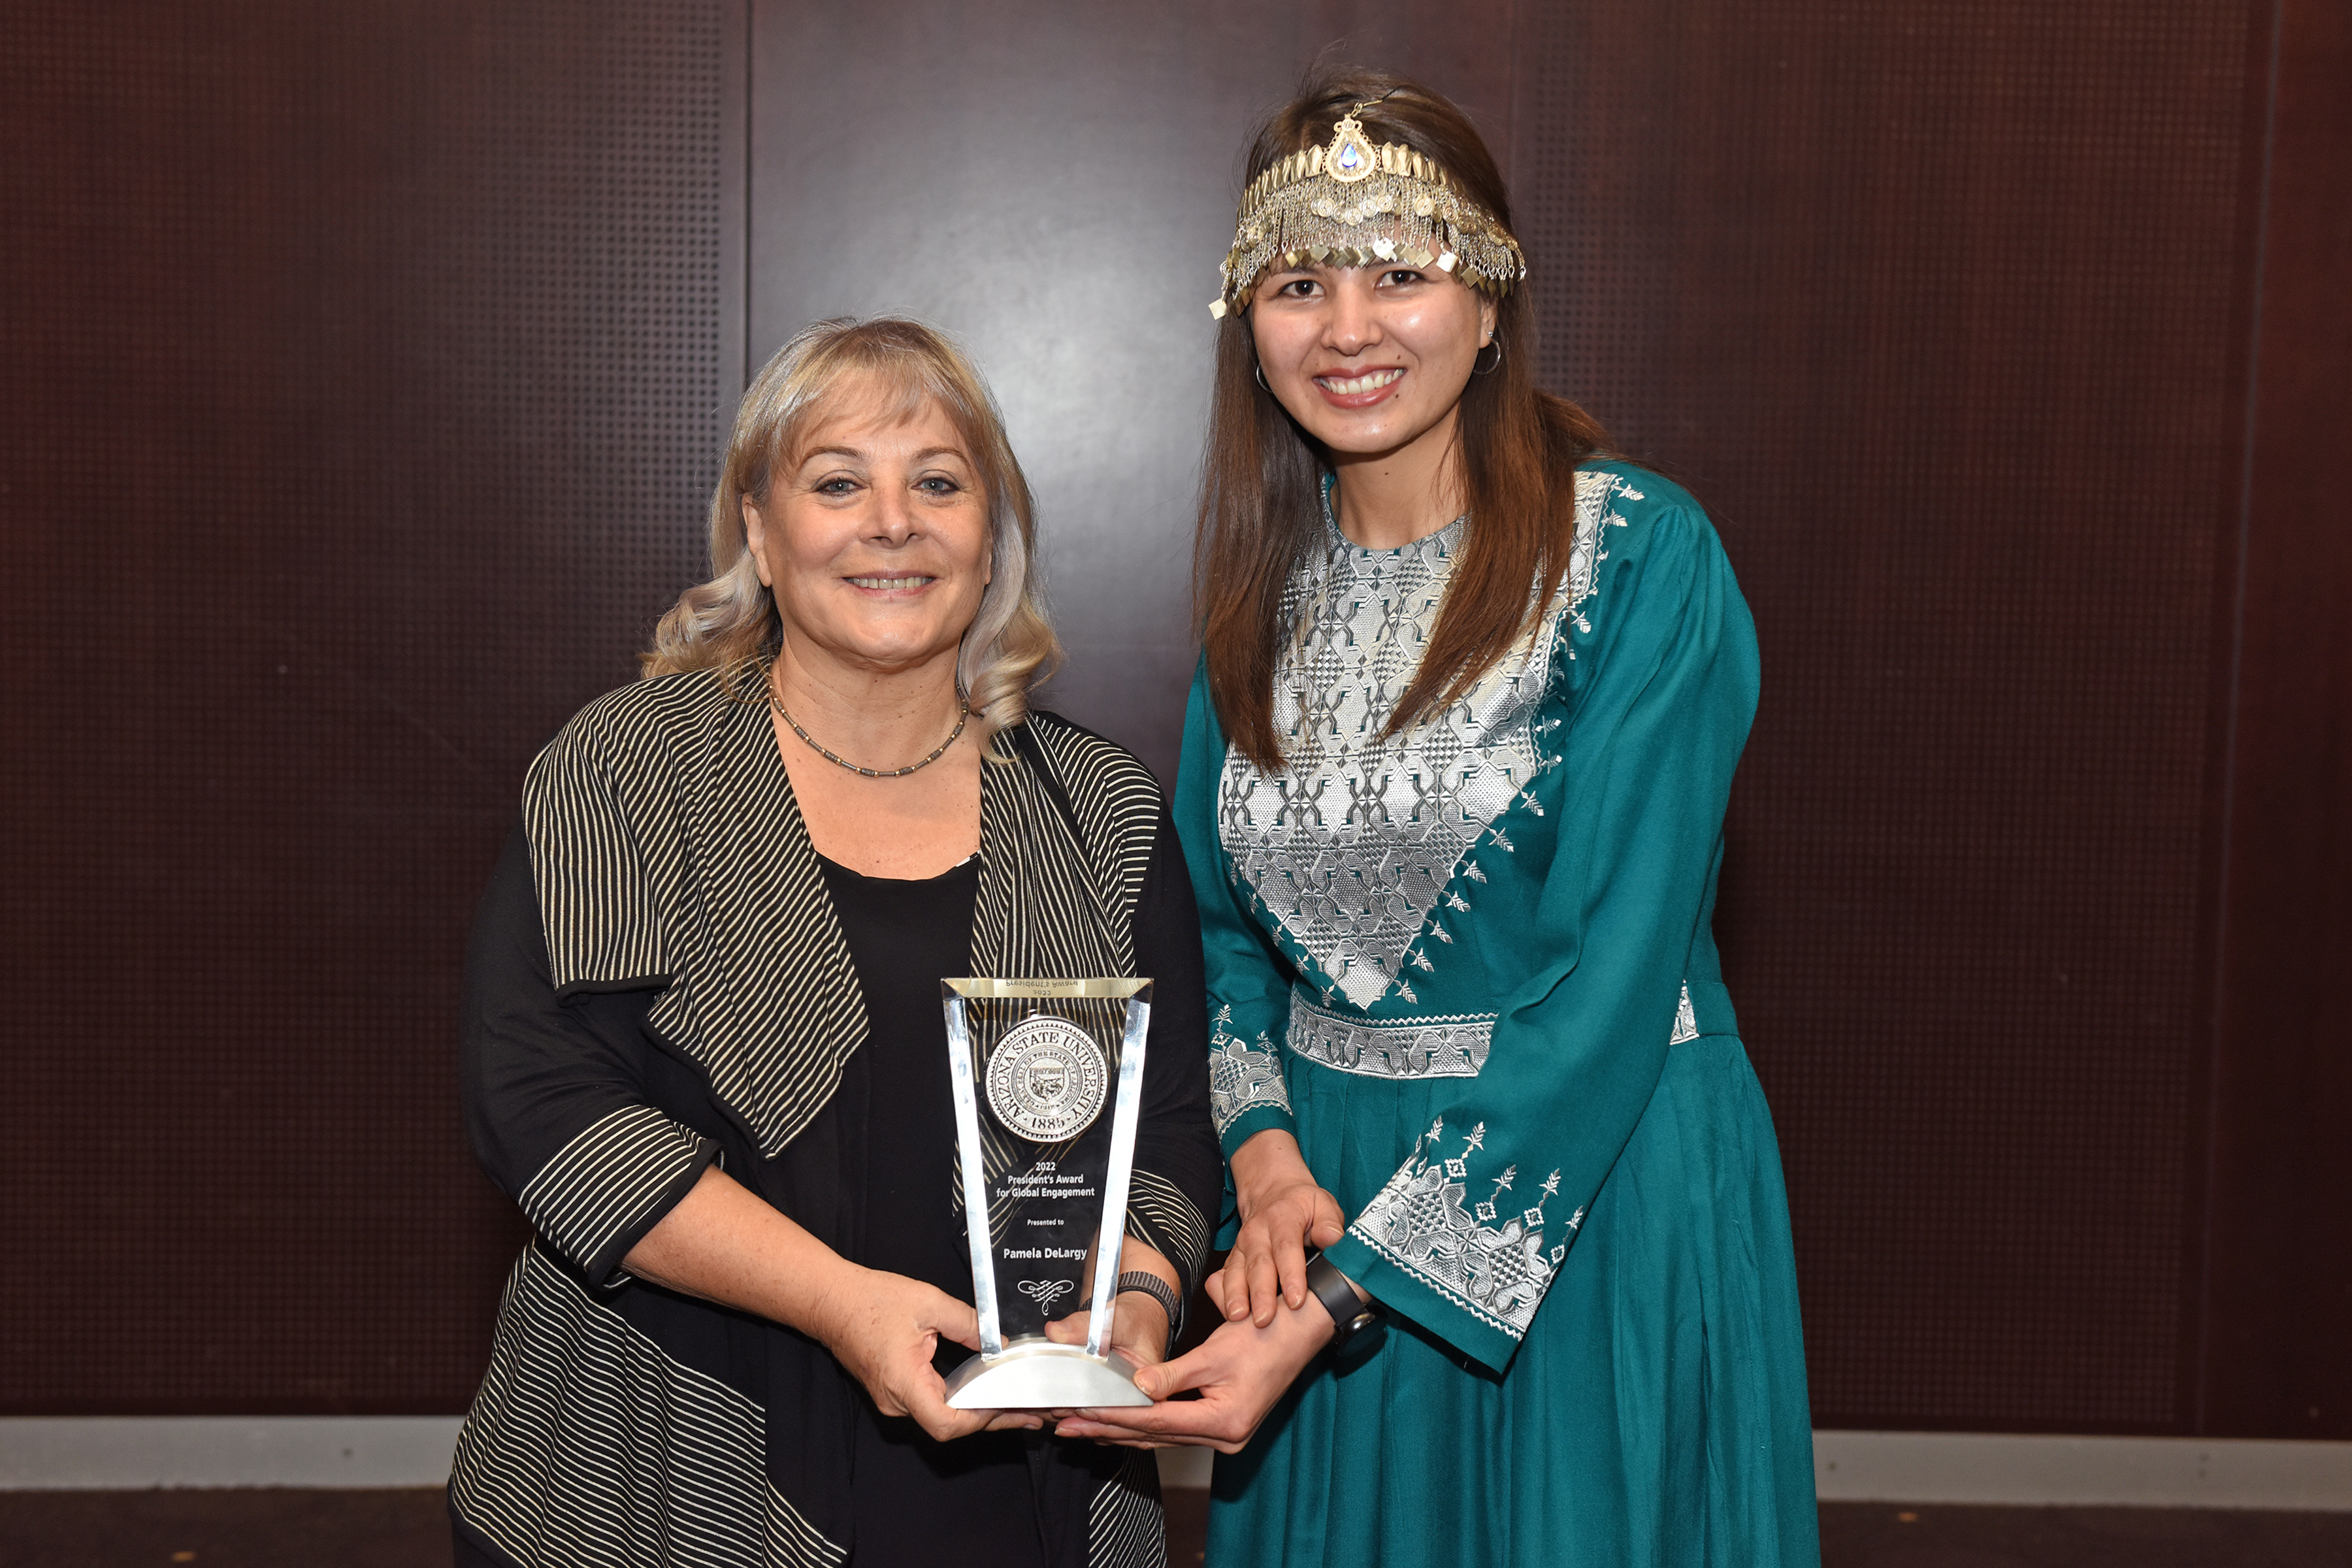 Woman holding award with student posing next to her